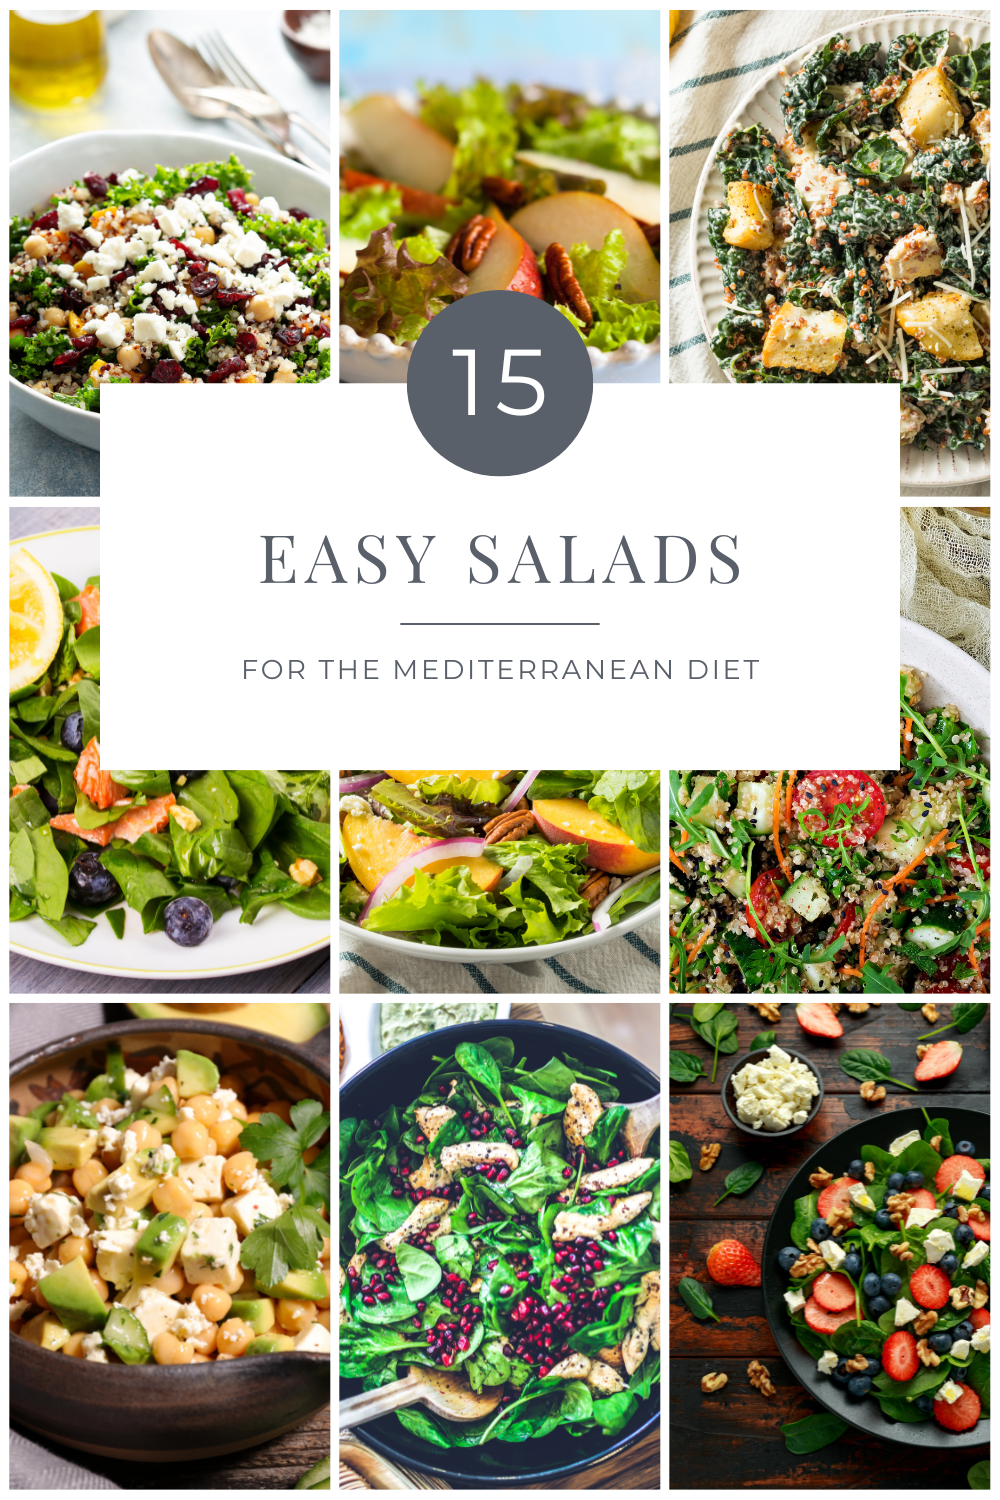 Salad Diet Plan for Weight Loss: Benefits and Recipes to Try